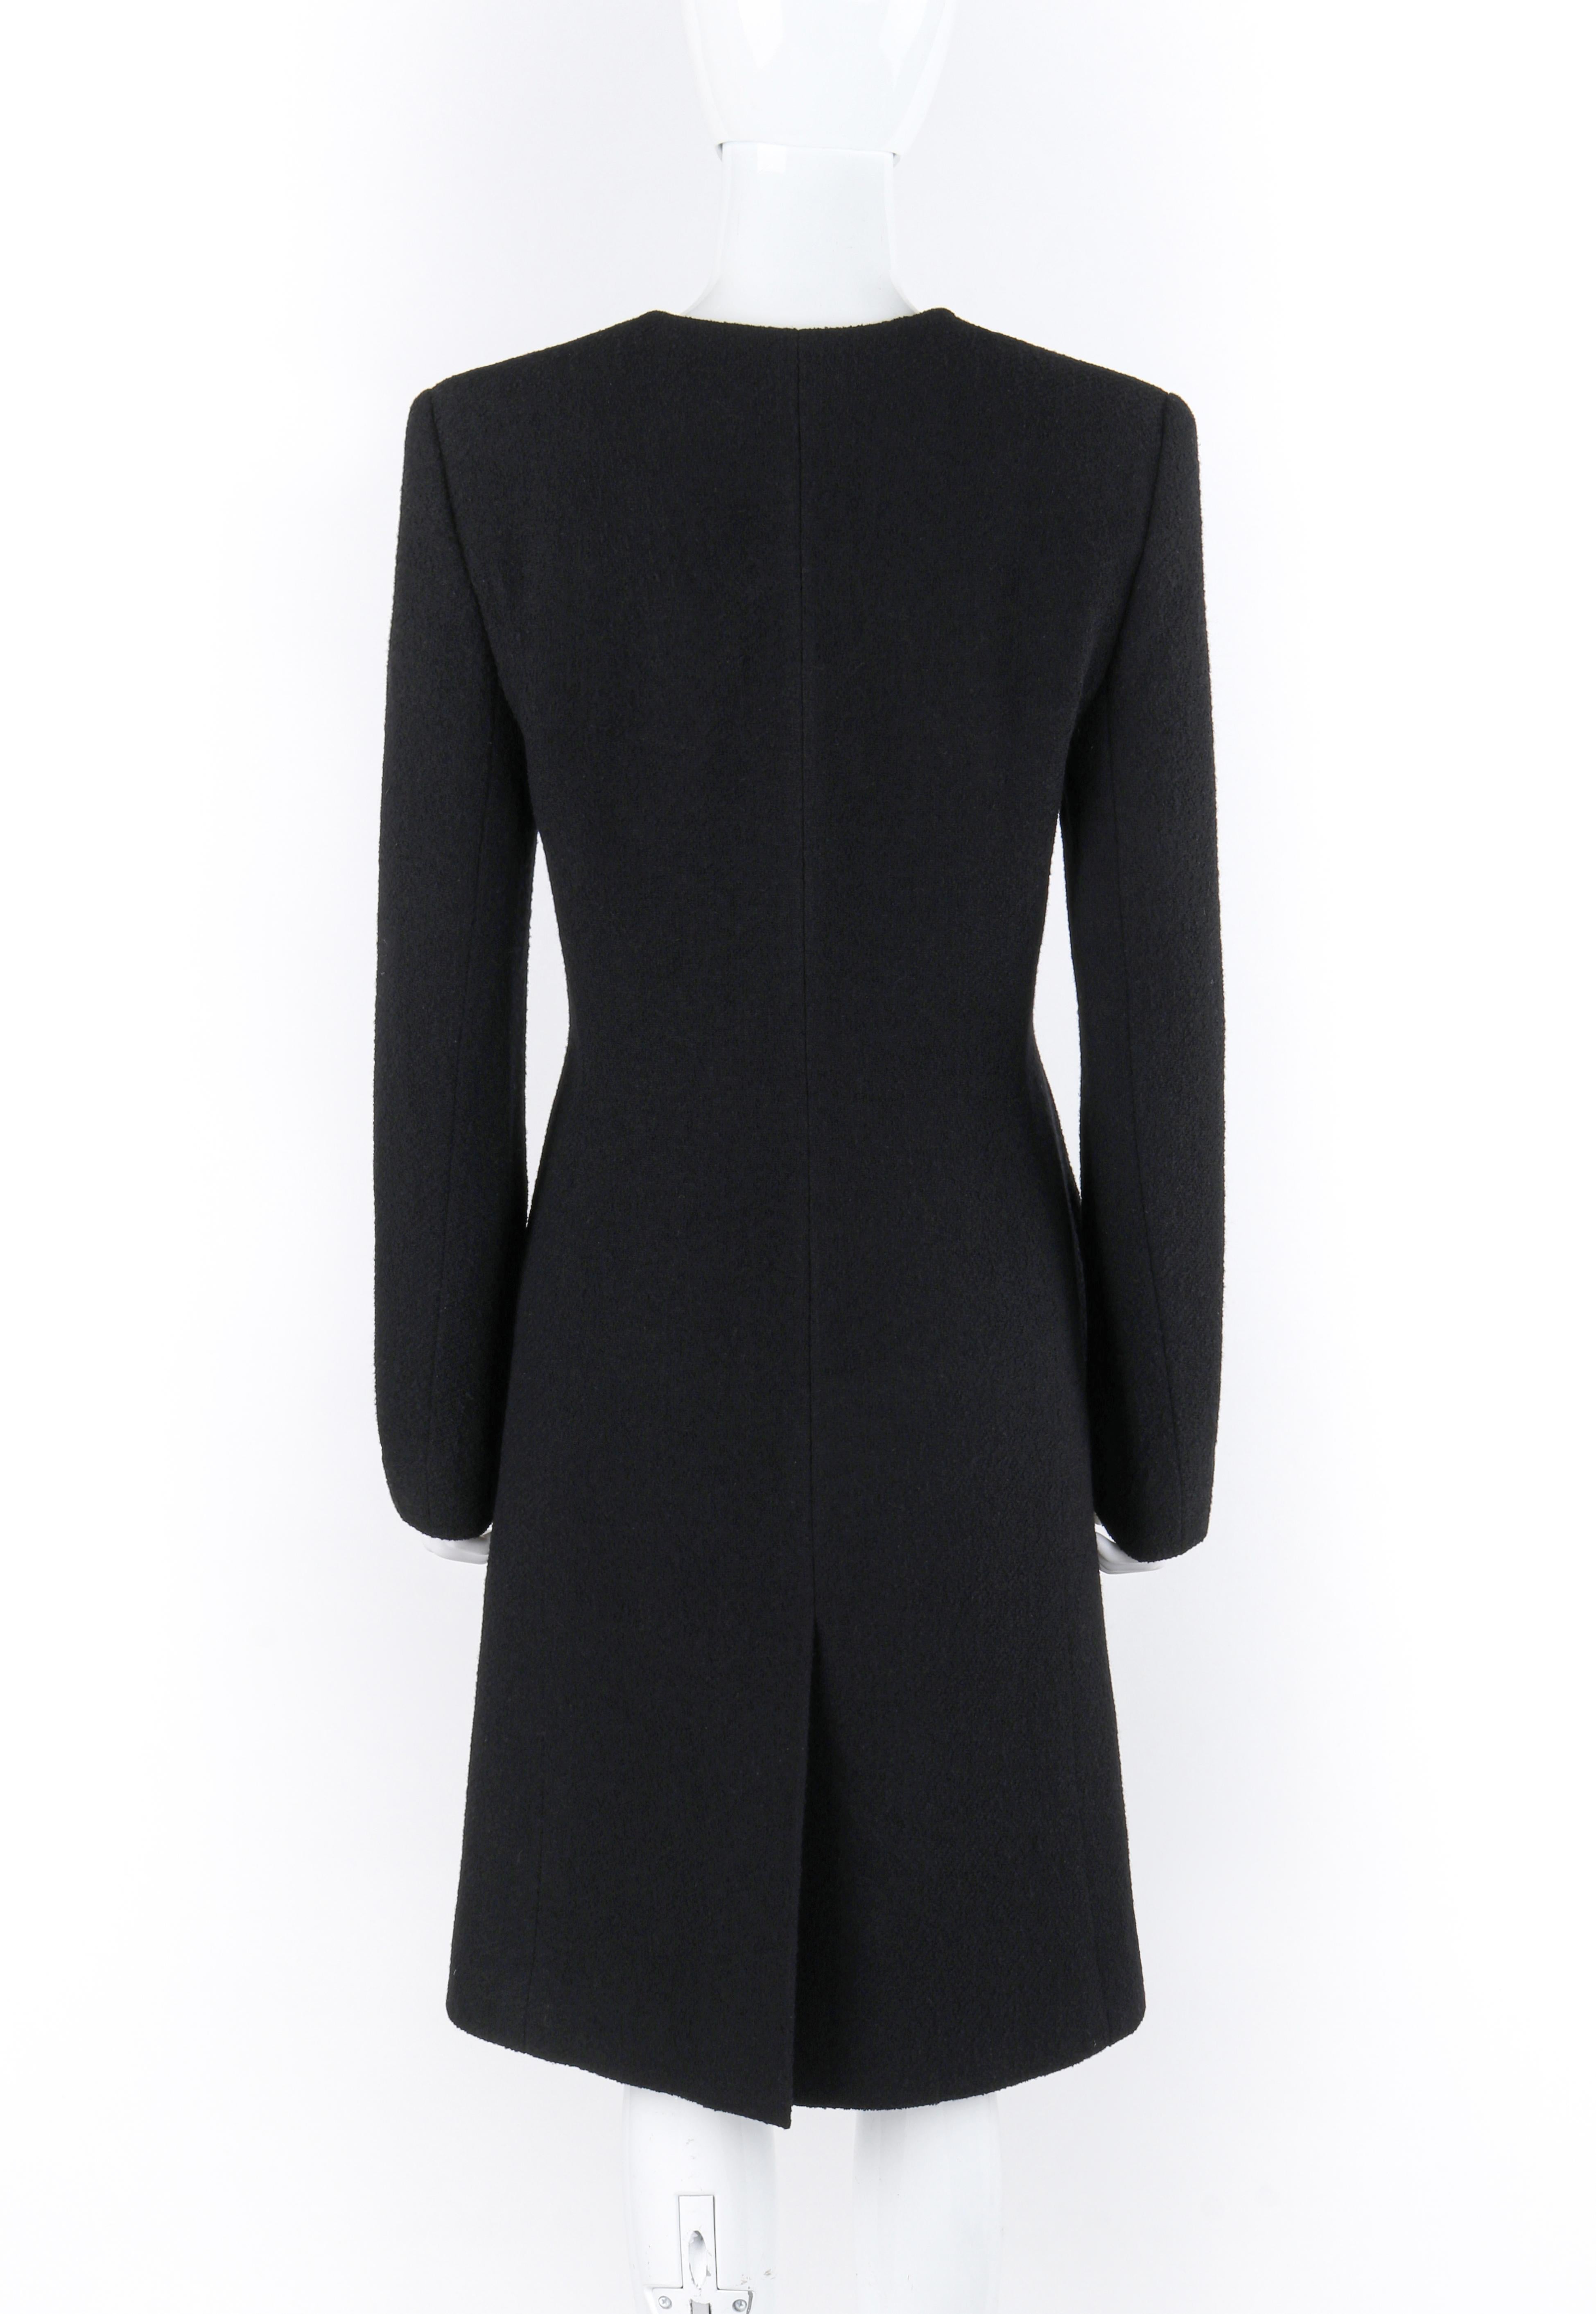 GIVENCHY Couture A/W 1998 ALEXANDER McQUEEN Black Button Up Tailored Coat For Sale 1